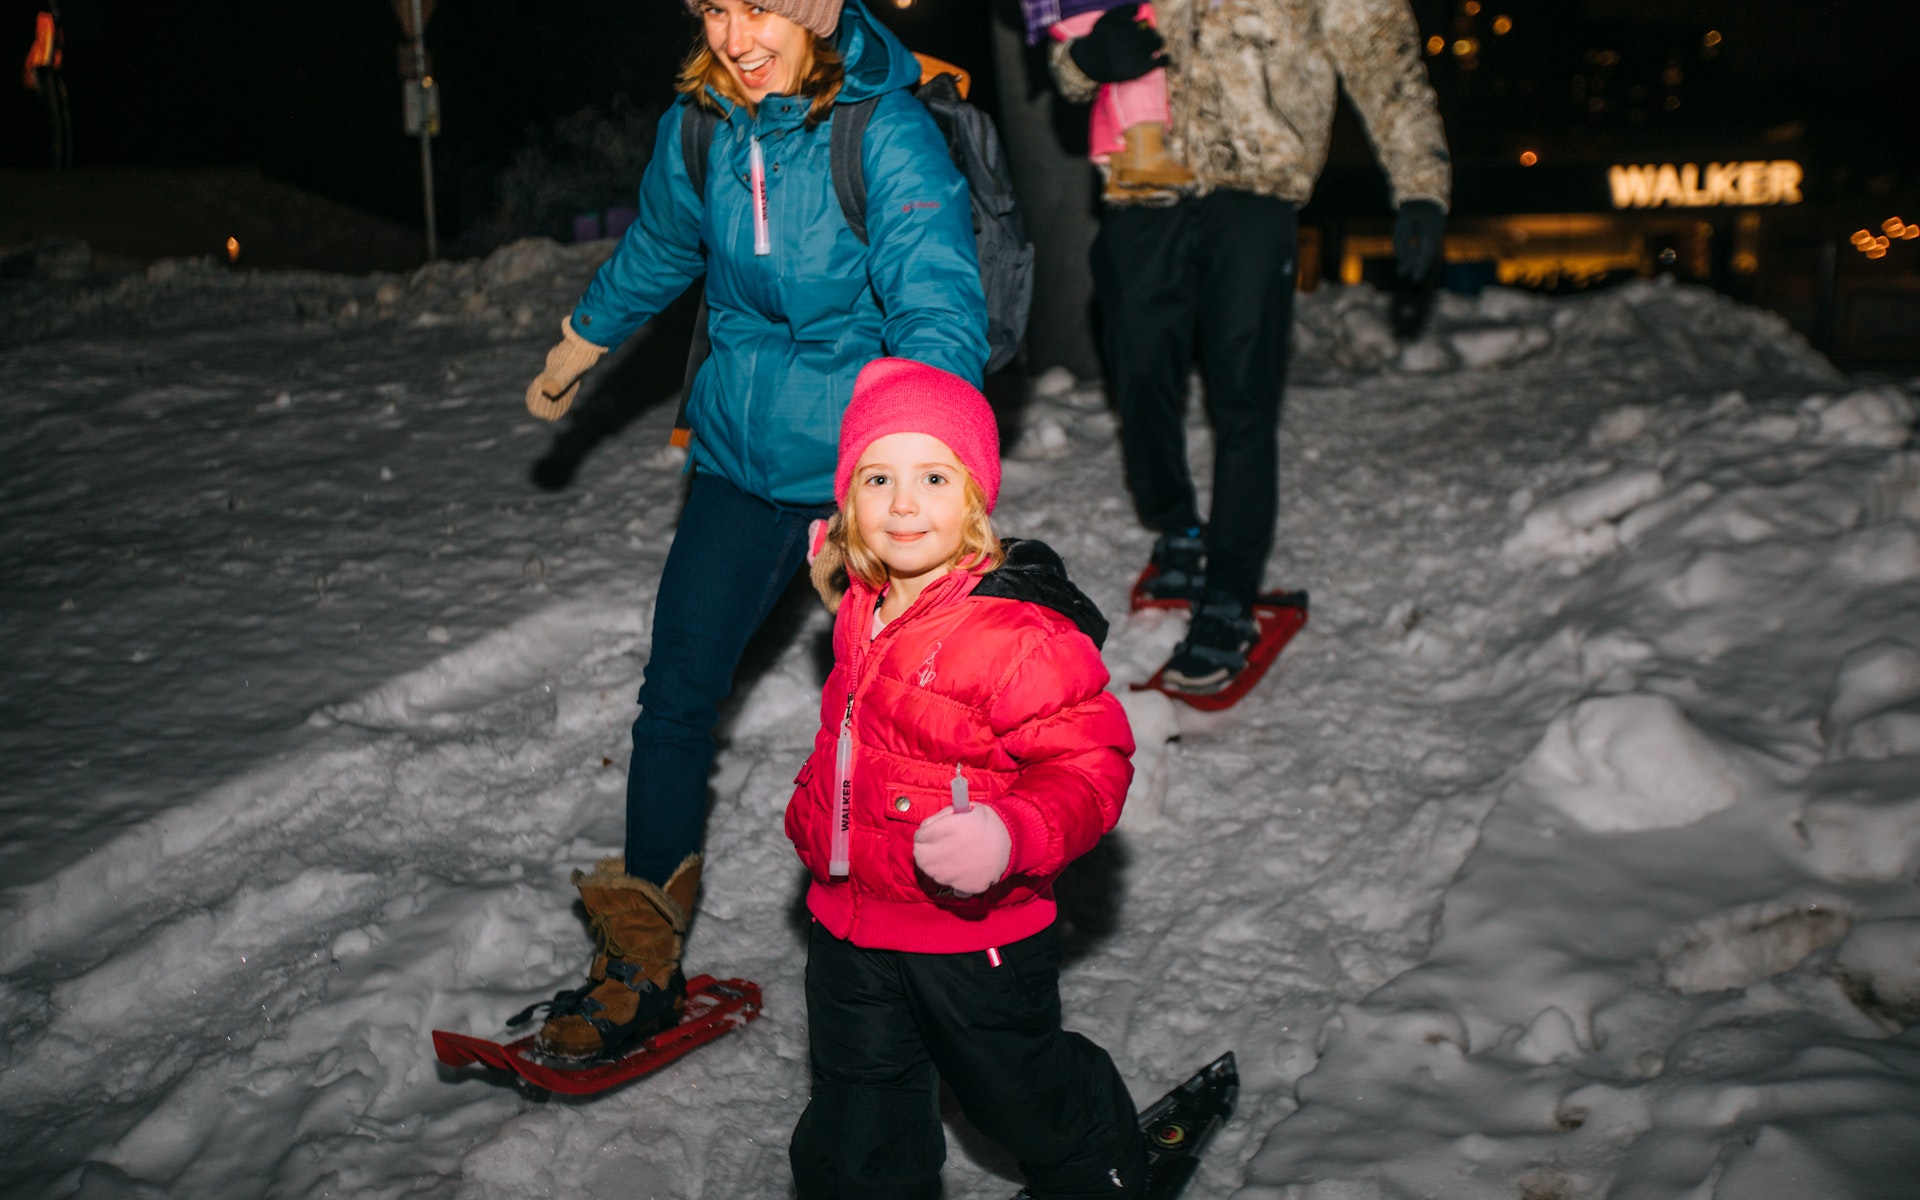 A woman holds the hand of a girl as they snowshoe together at night.